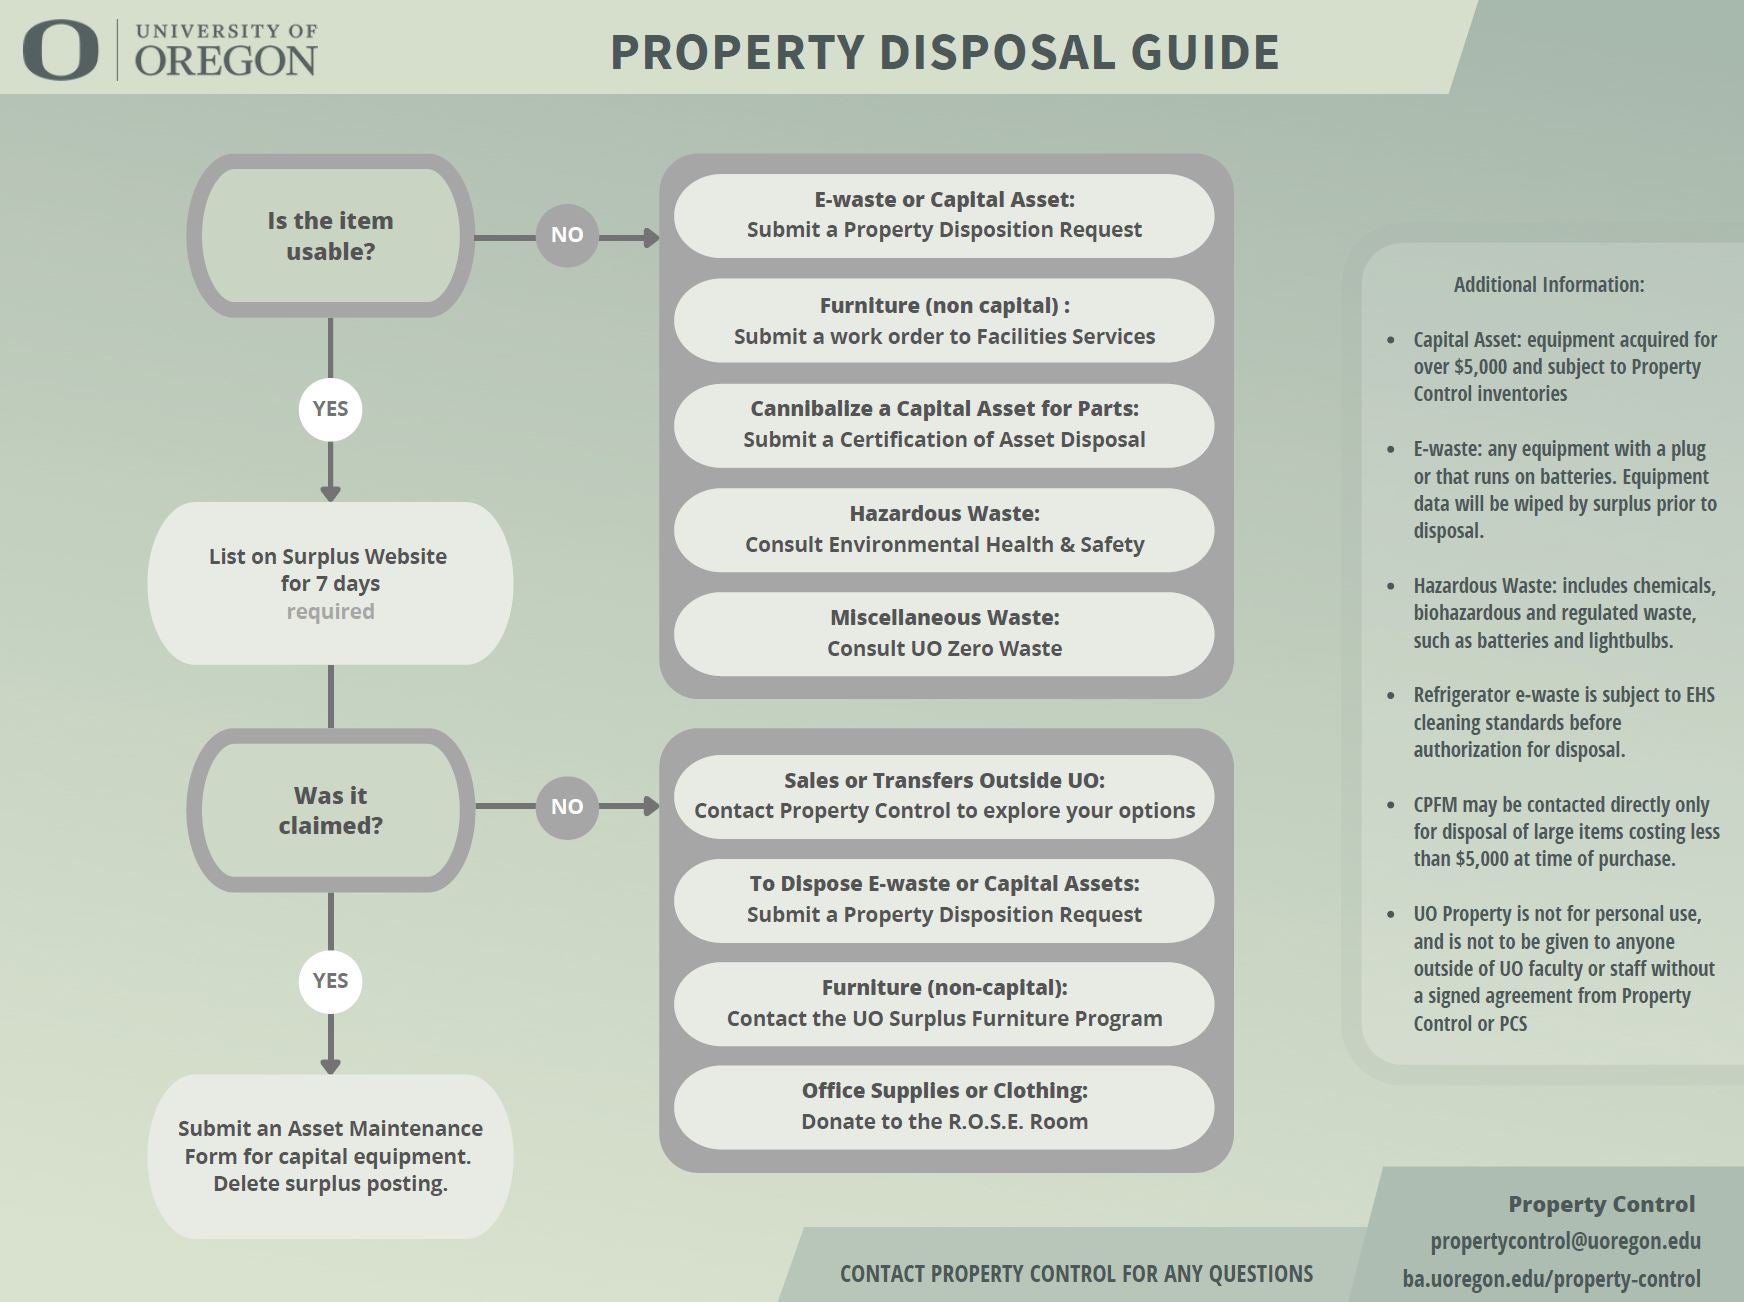 Flowchart for disposal of surplus property at the University of Oregon